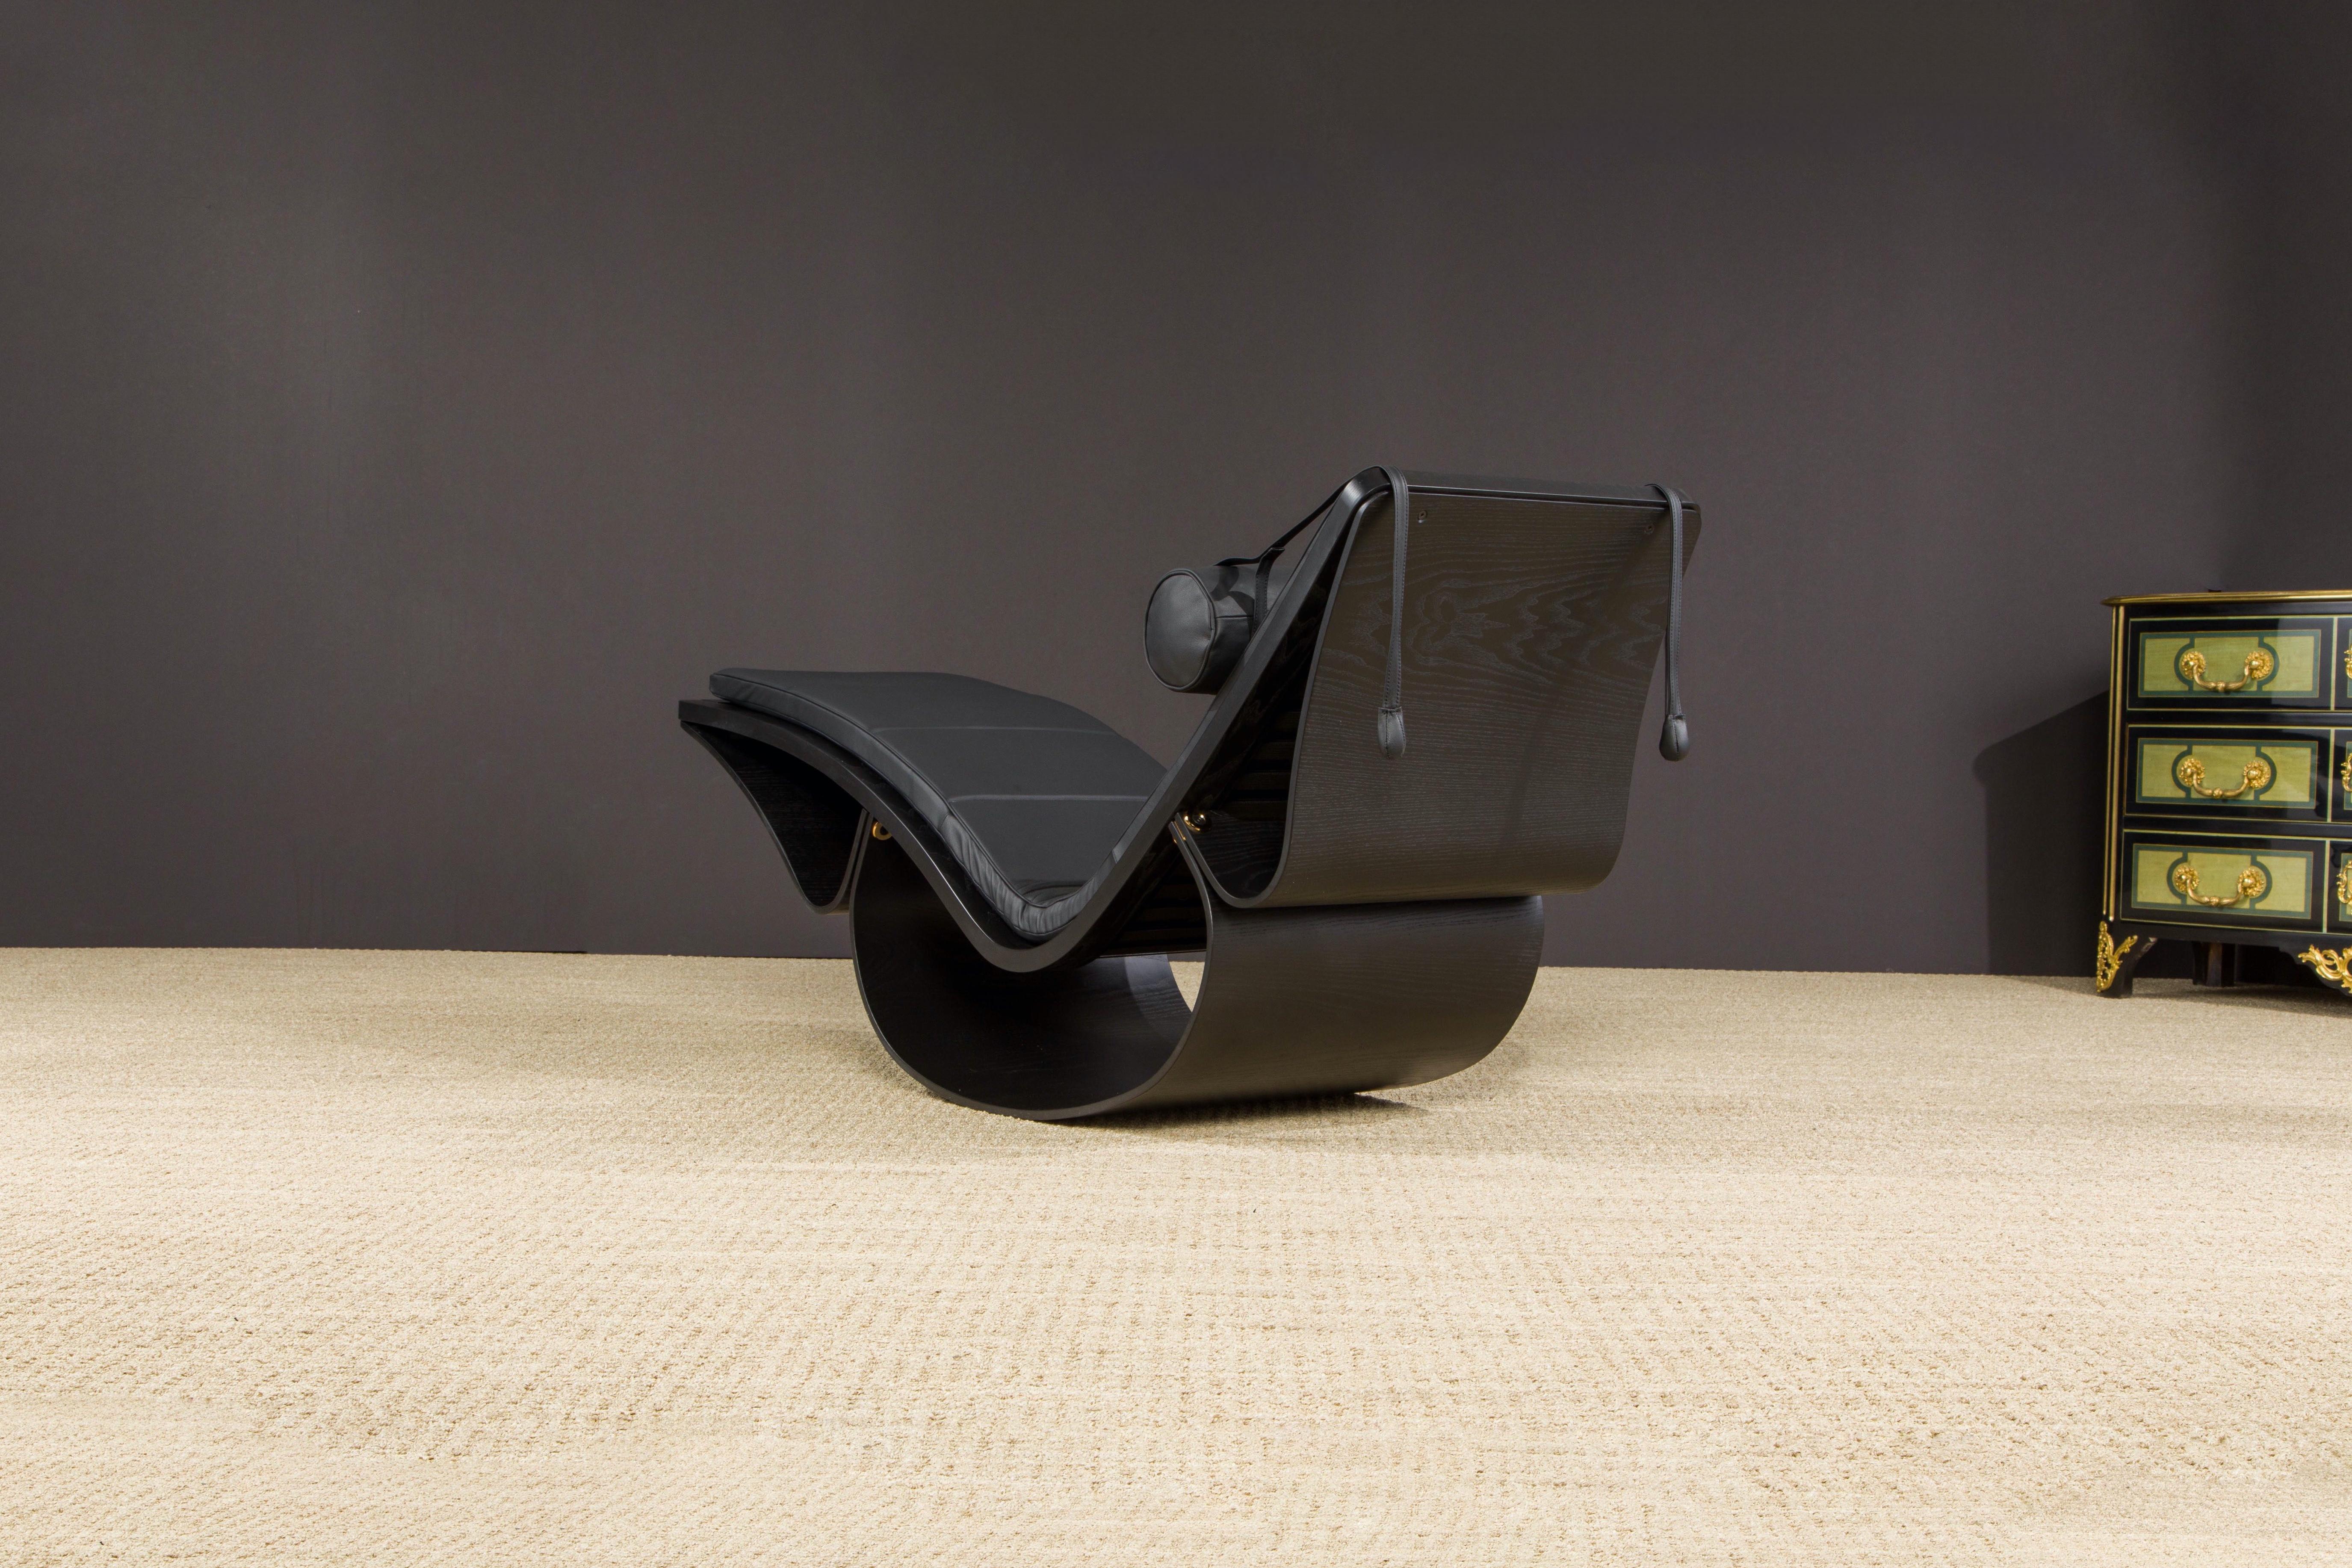 'Rio' Rocking Chaise Lounge by Oscar Niemeyer for Fasem International, Signed For Sale 3